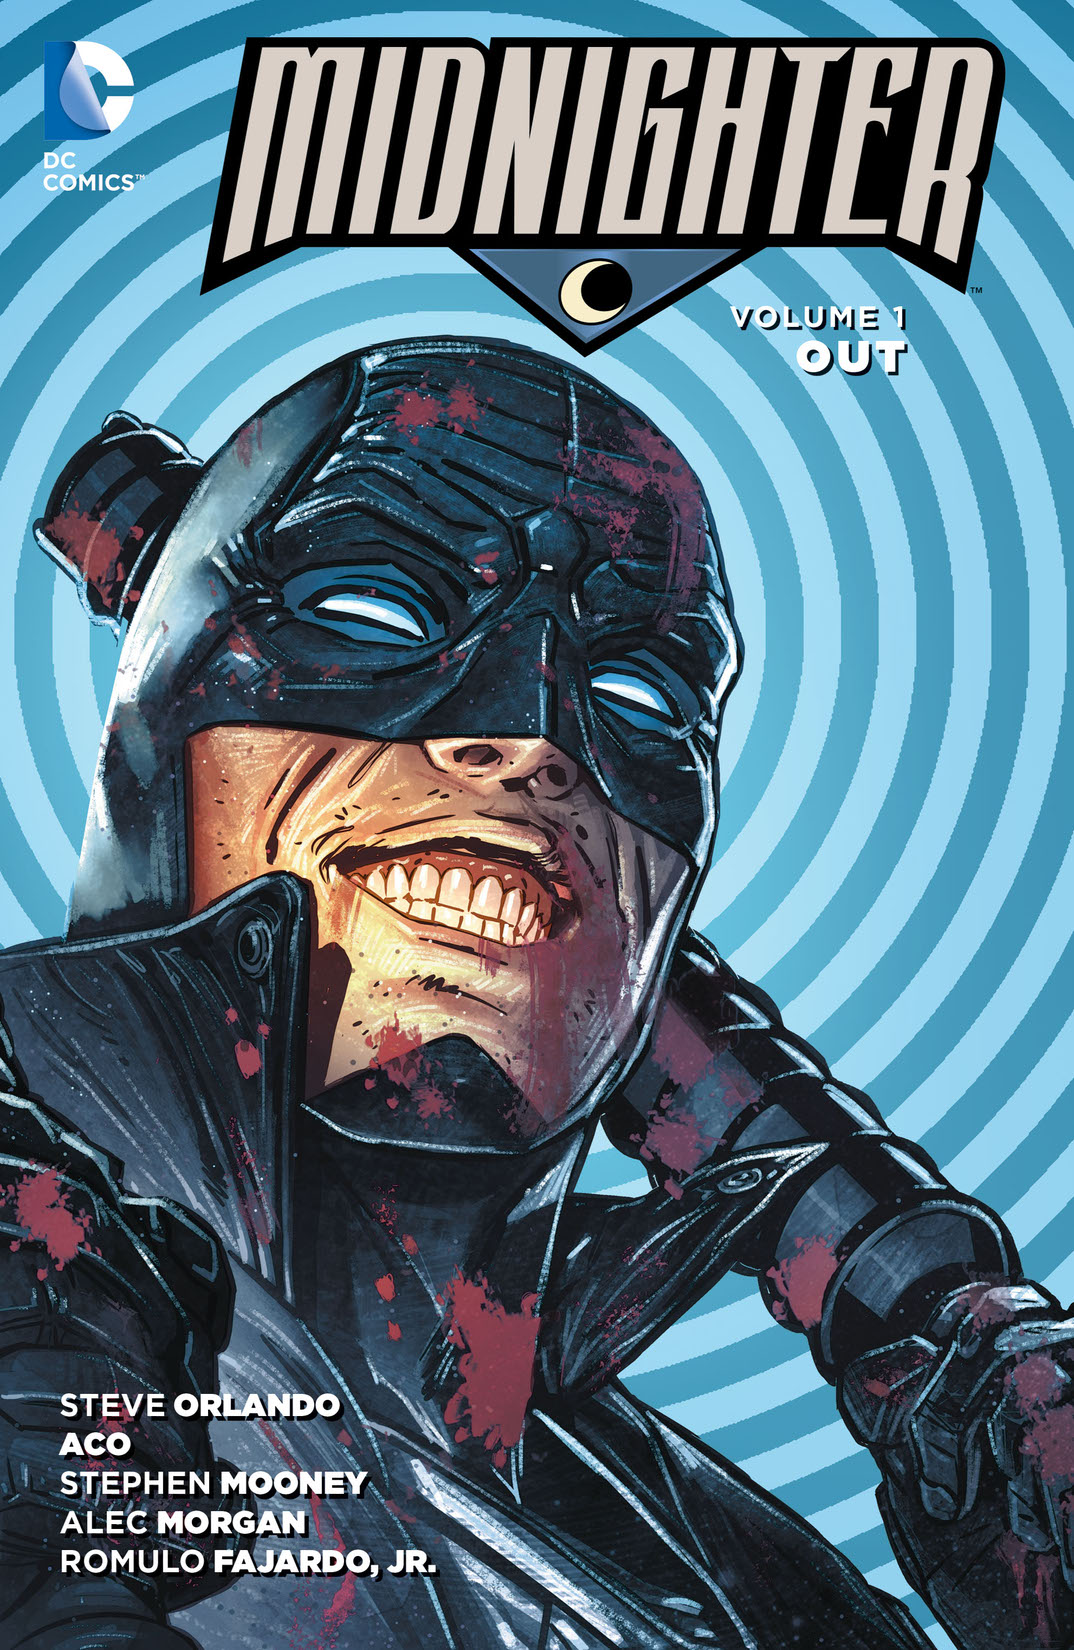 Midnighter Vol. 1: Out preview images